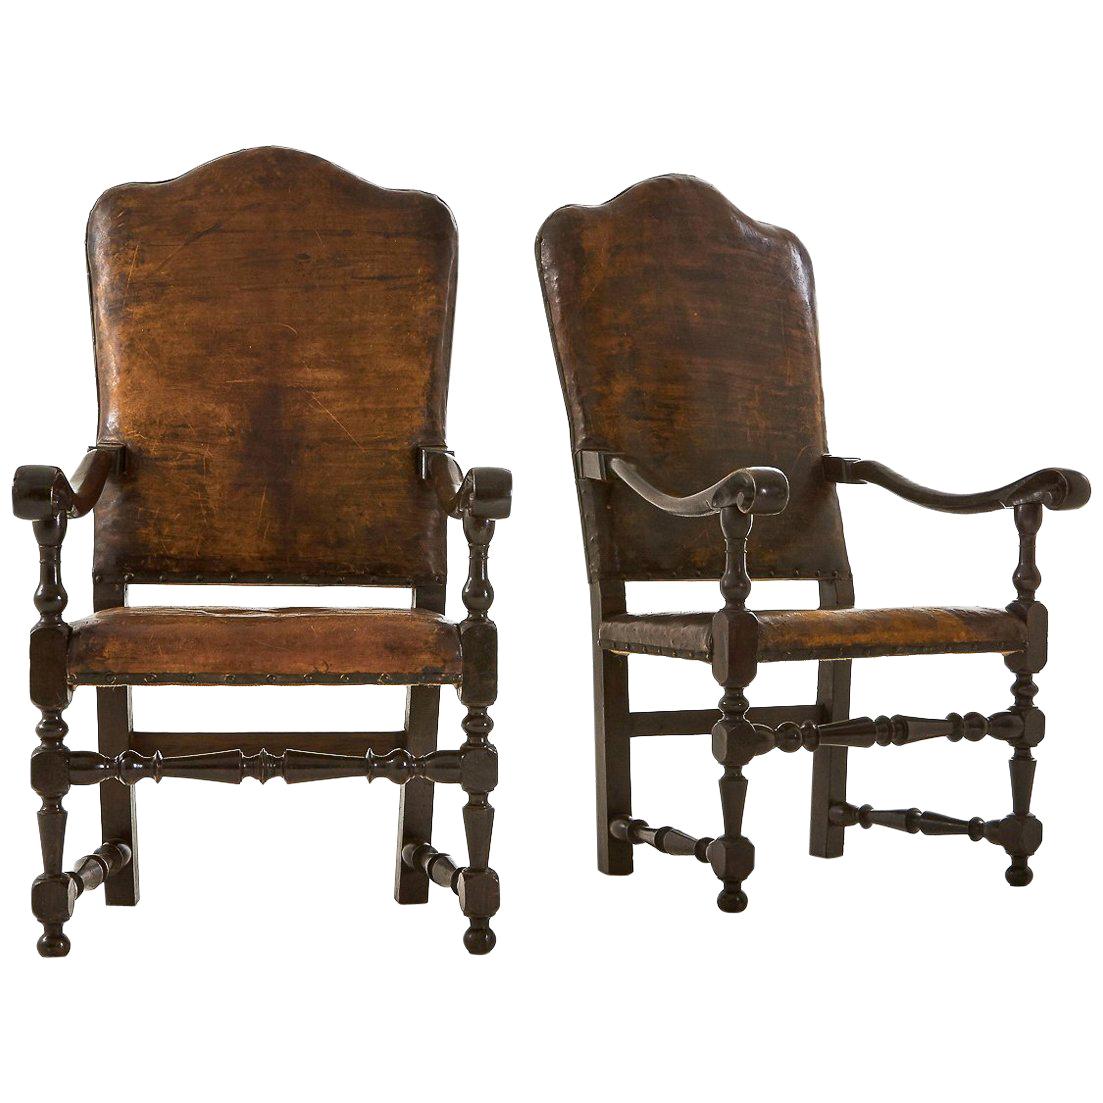 Pair of 18th Century Italian Leather Armchairs For Sale